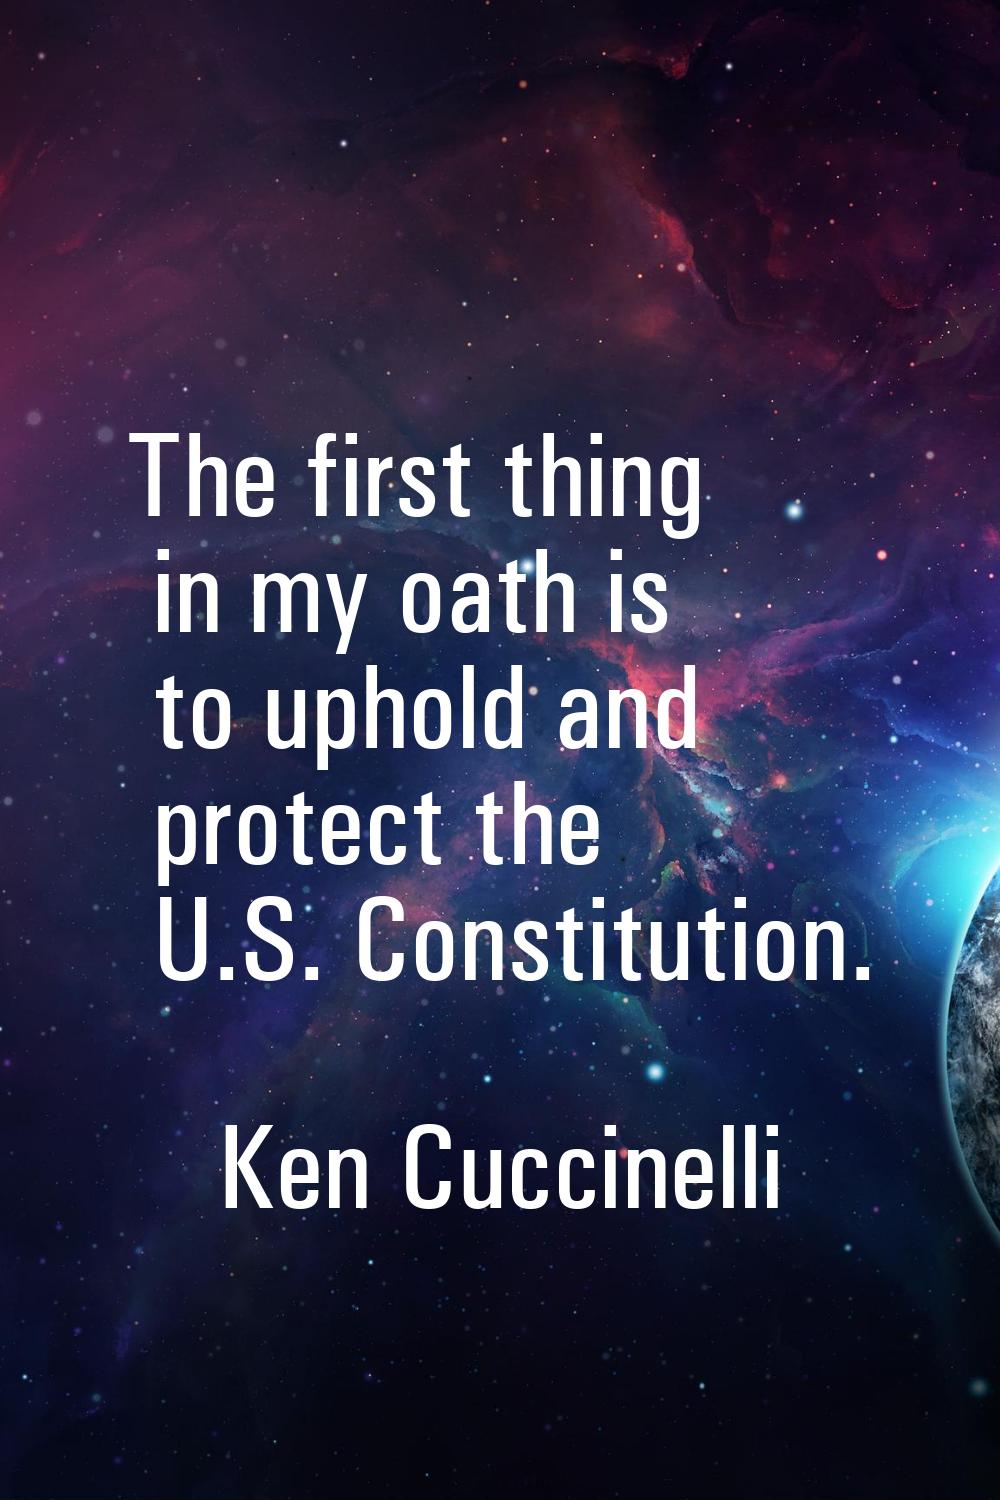 The first thing in my oath is to uphold and protect the U.S. Constitution.